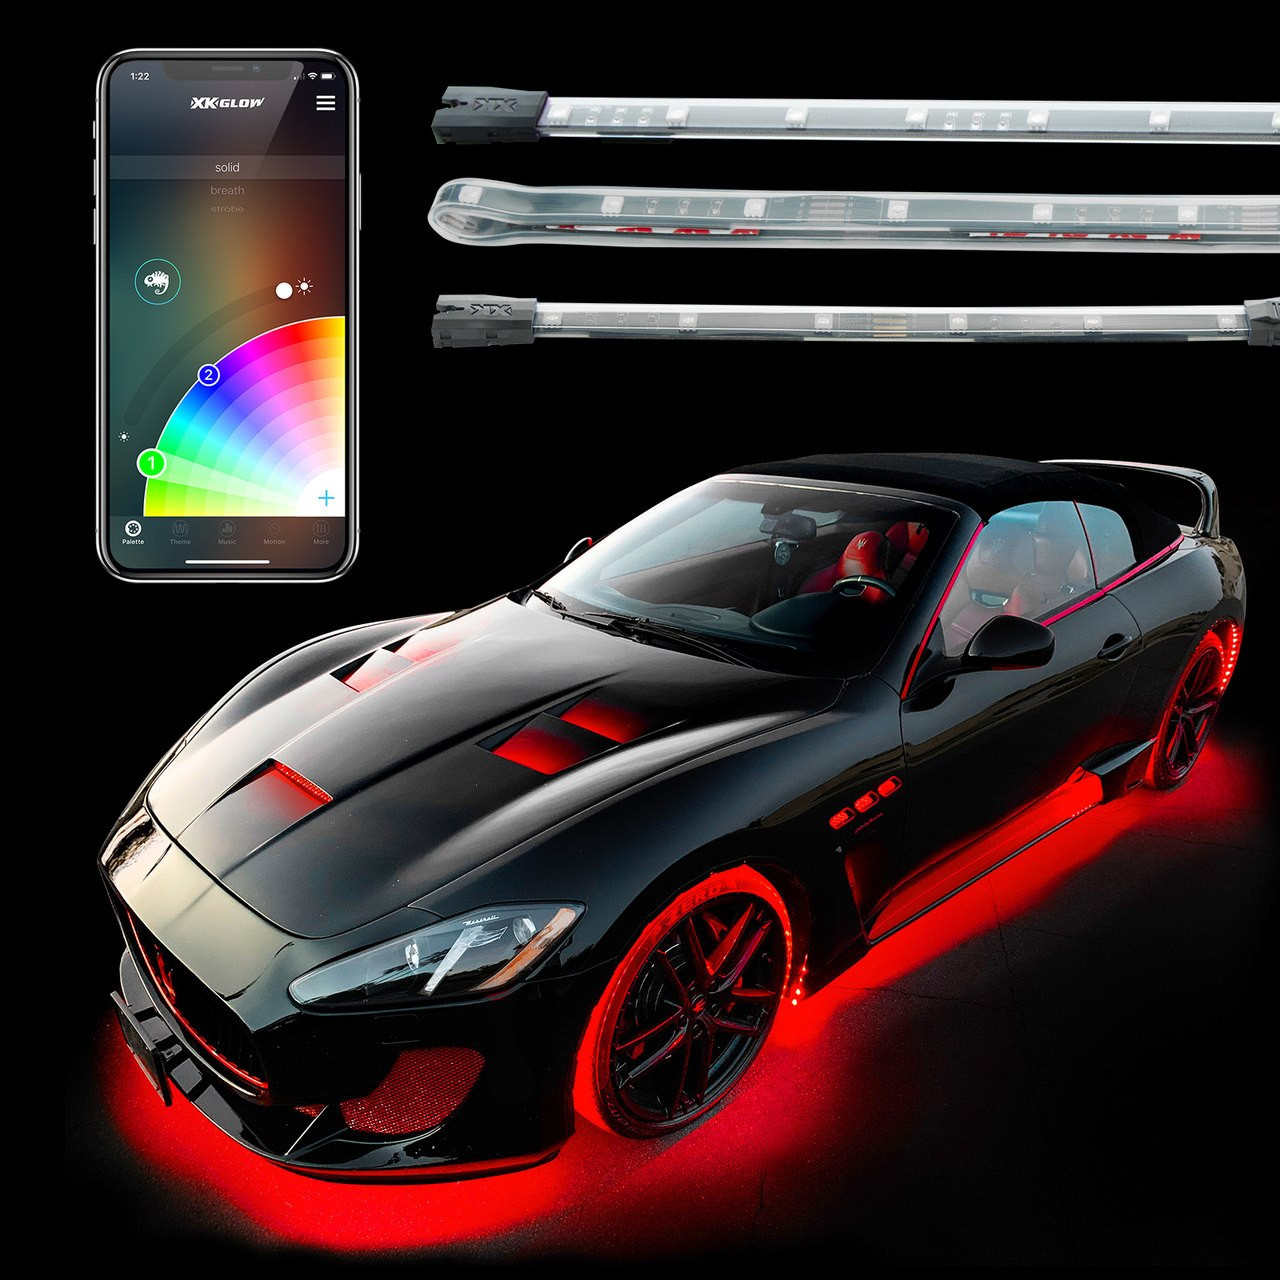 Underglow Interior Led Accent Light Kits For Cars Xkchrome Smartphone App